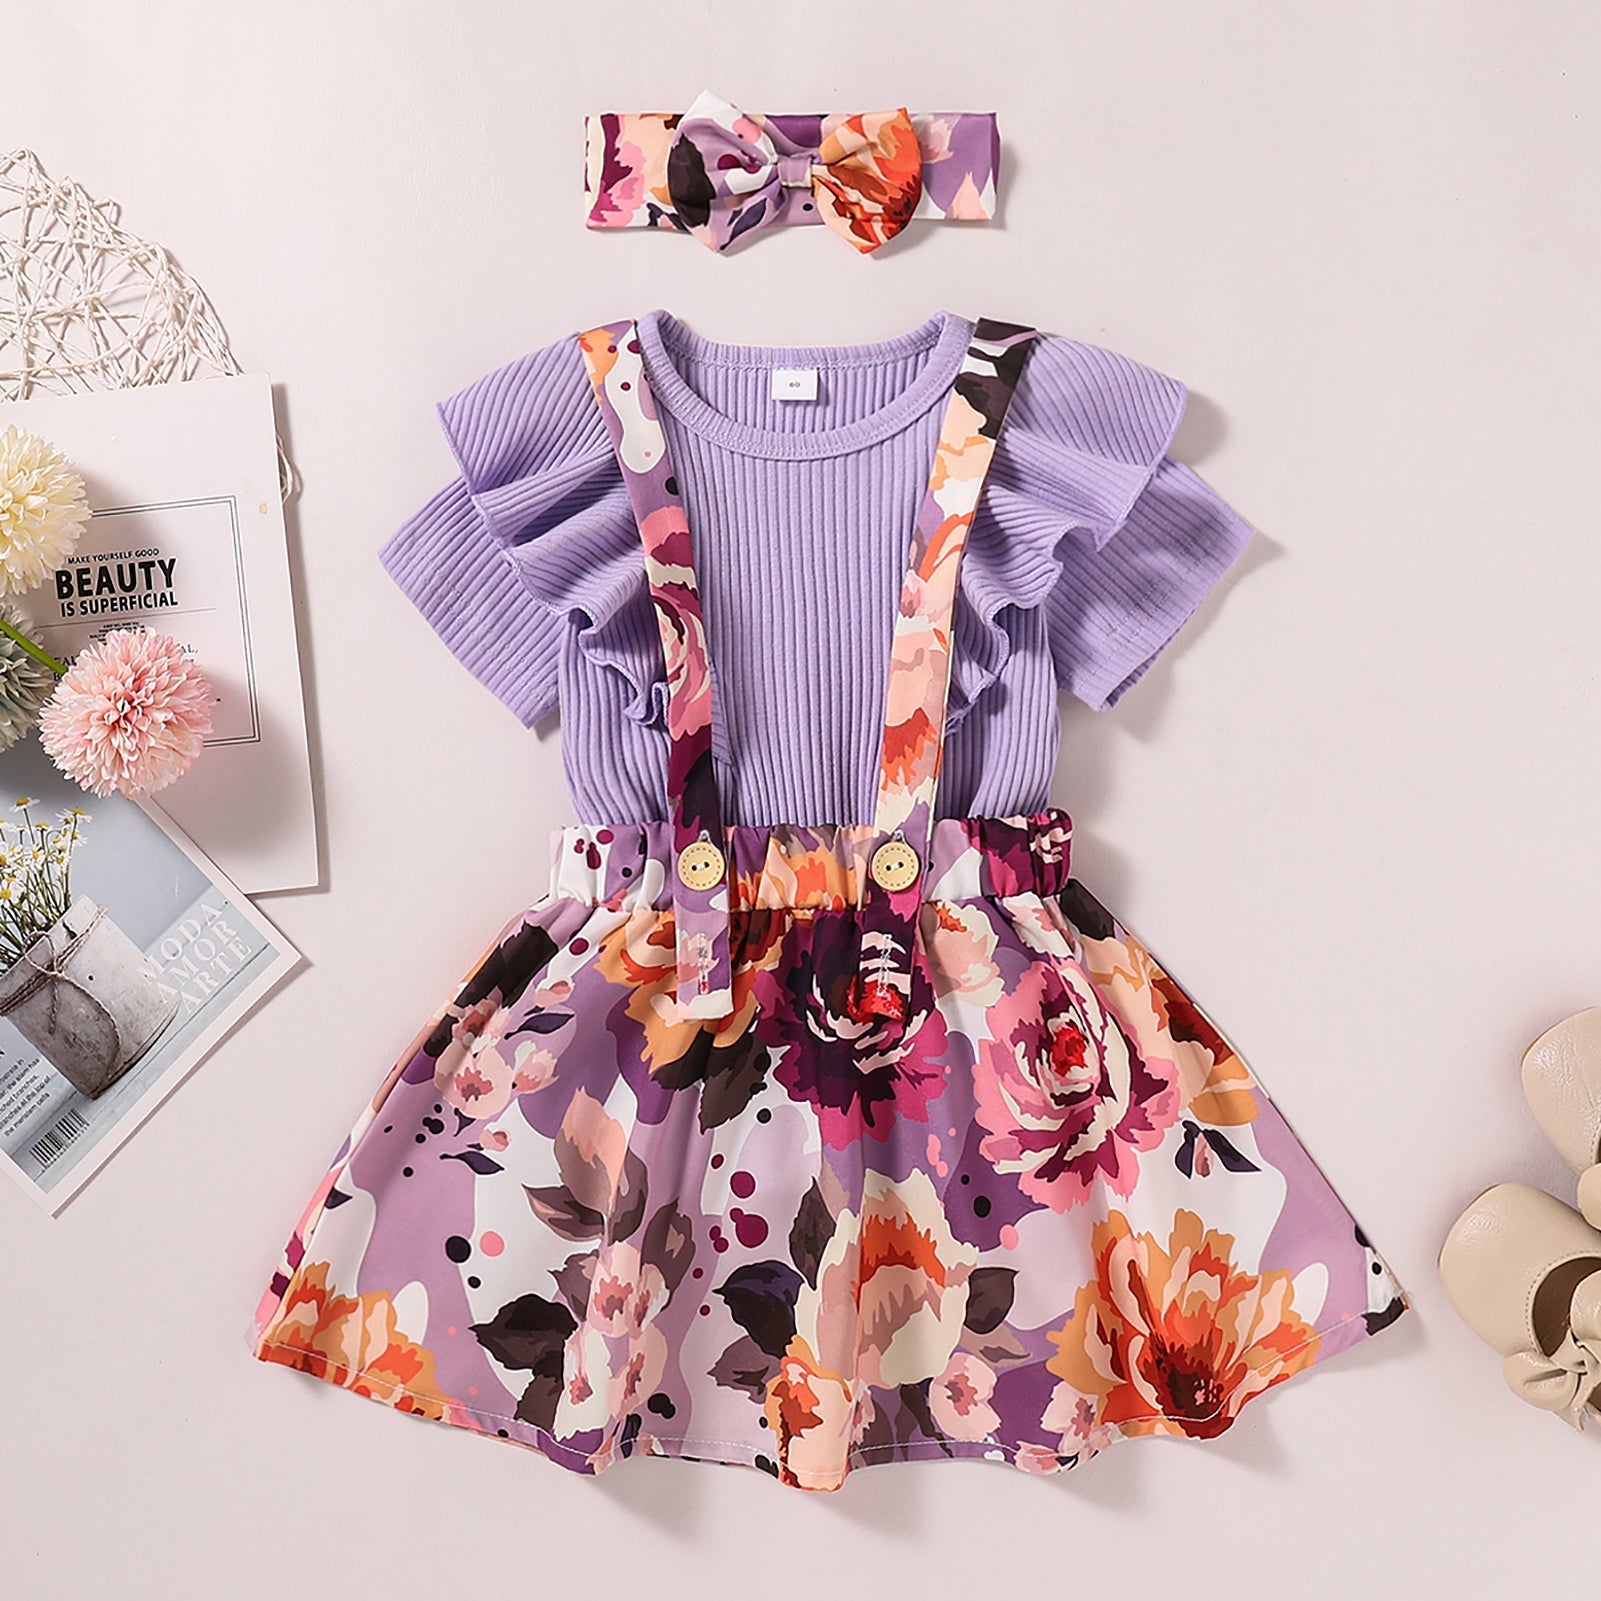 Girls Ruffle Trim Tee Shirt and Floral Pinafore Skirt Set Age: 1-6y - Fashion Girl Online Store